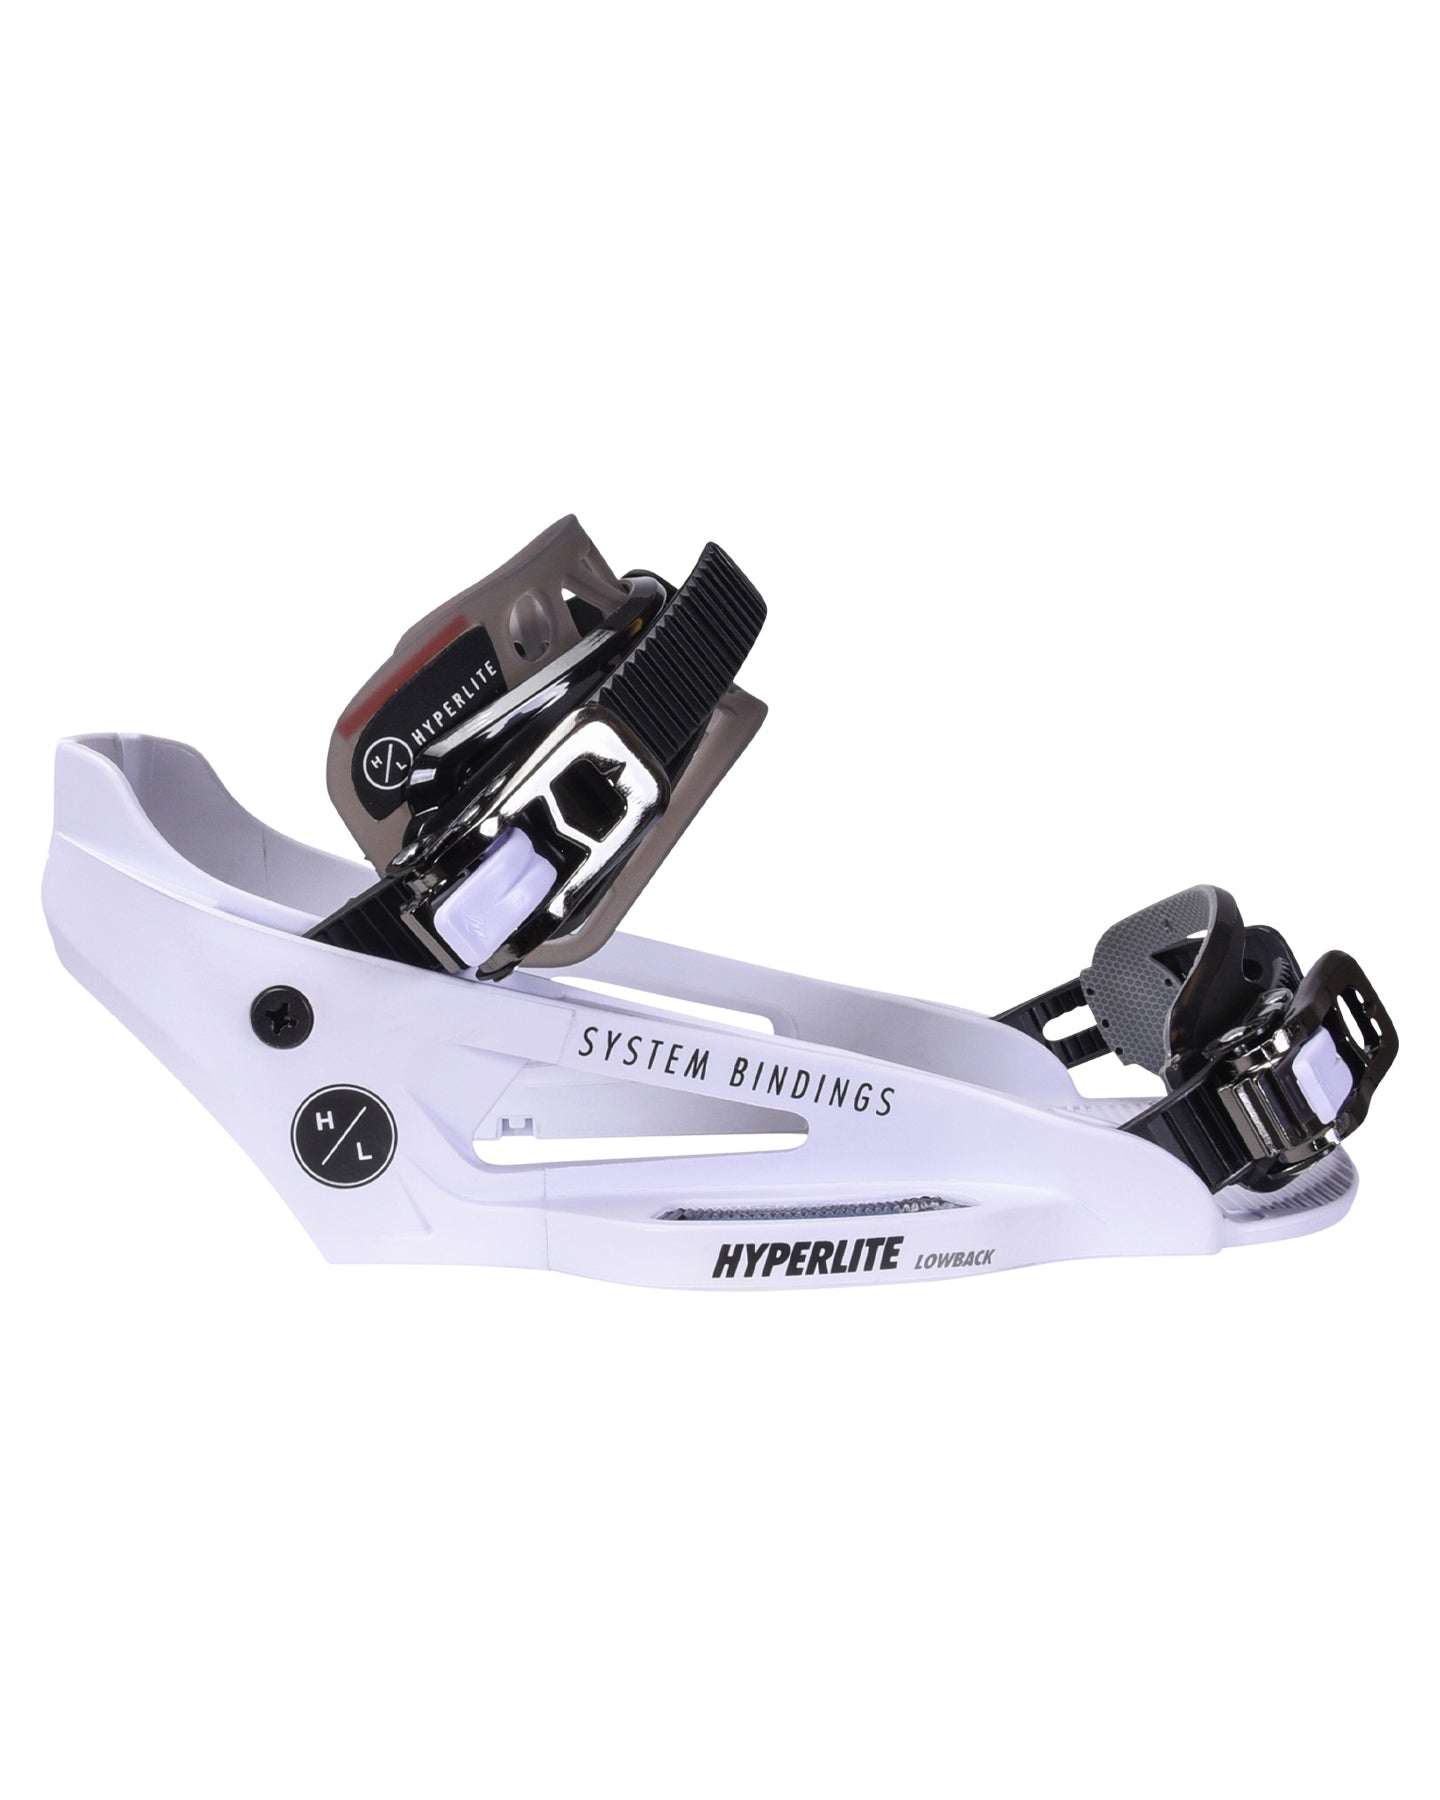 Hyperlite System Lowback Wakeboard Boots - White - 2024 Wakeboard Boots - Mens - Trojan Wake Ski Snow